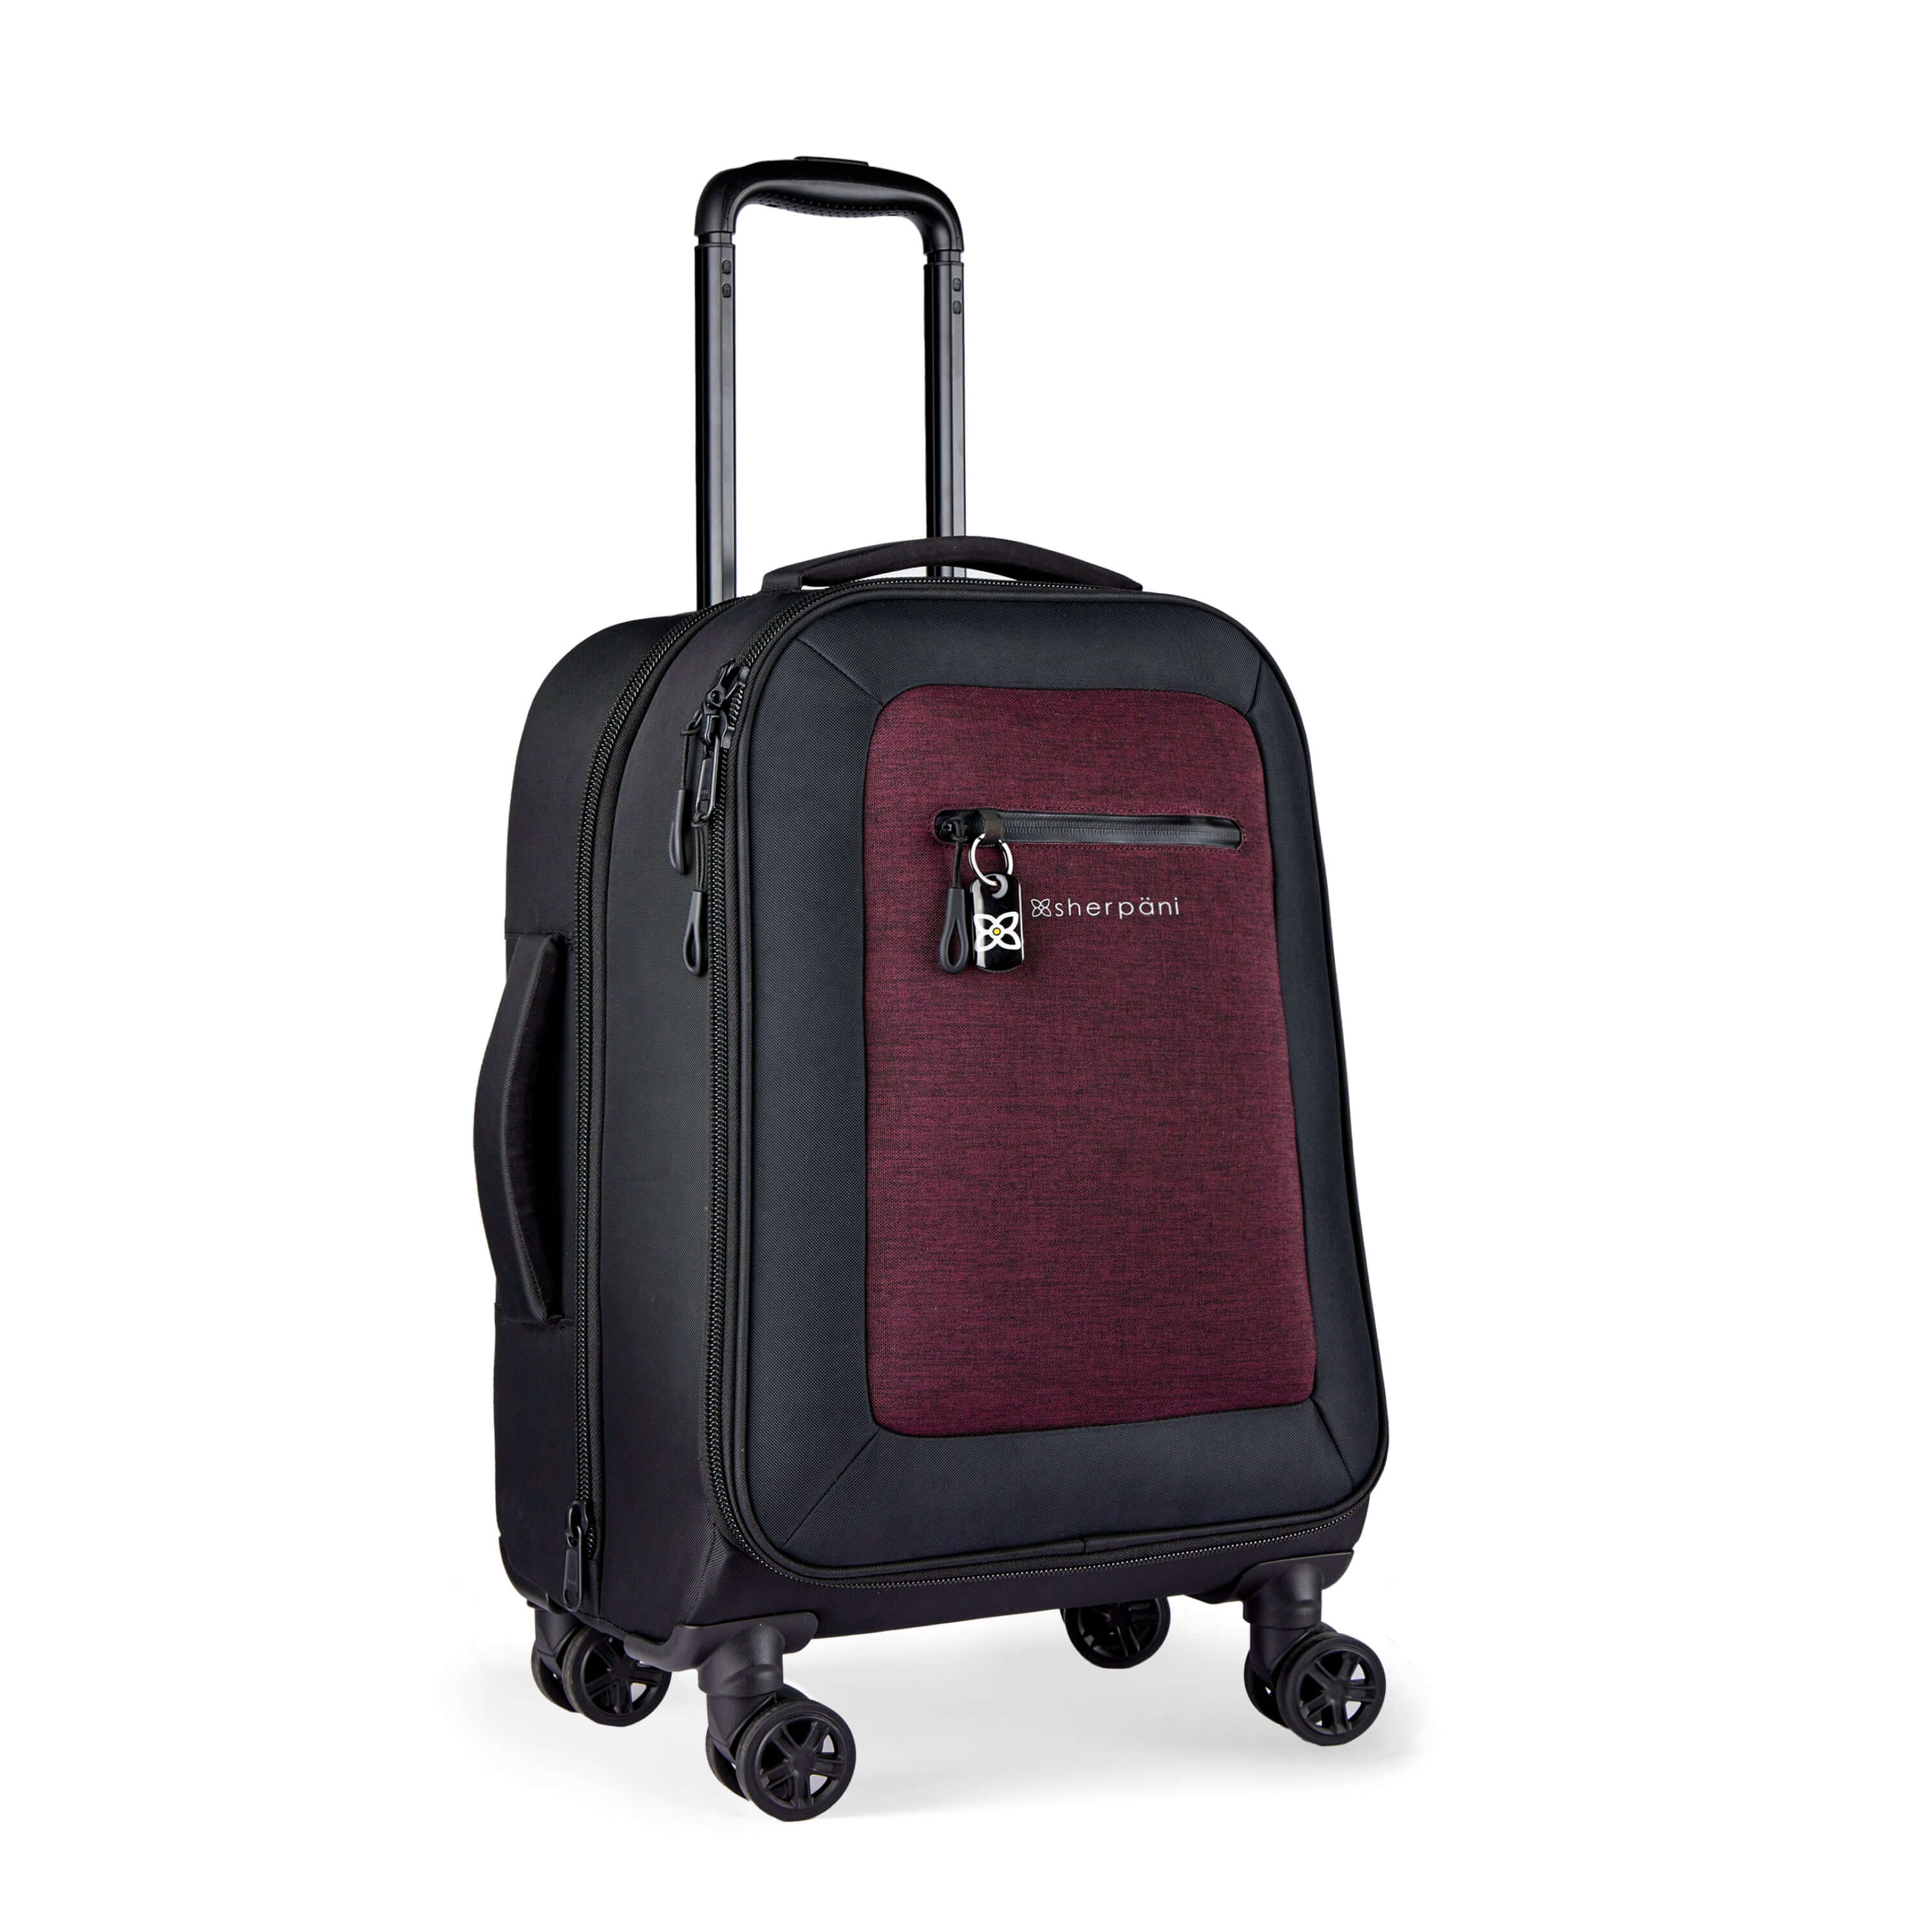 Angled front view of Sherpani’s Anti-Theft luggage the Latitude in Merlot. The suitcase has a soft shell exterior made from recycled plastic bottles and features vegan leather accents in black. There is a main zipper compartment, an expansion zipper and an external pocket on the front with a locking zipper and a ReturnMe tag. On the top of the suitcase sits a retractable luggage handle. On the side sits an easy-access handle. At the bottom are four 360-degree spinner wheels for smooth rolling.